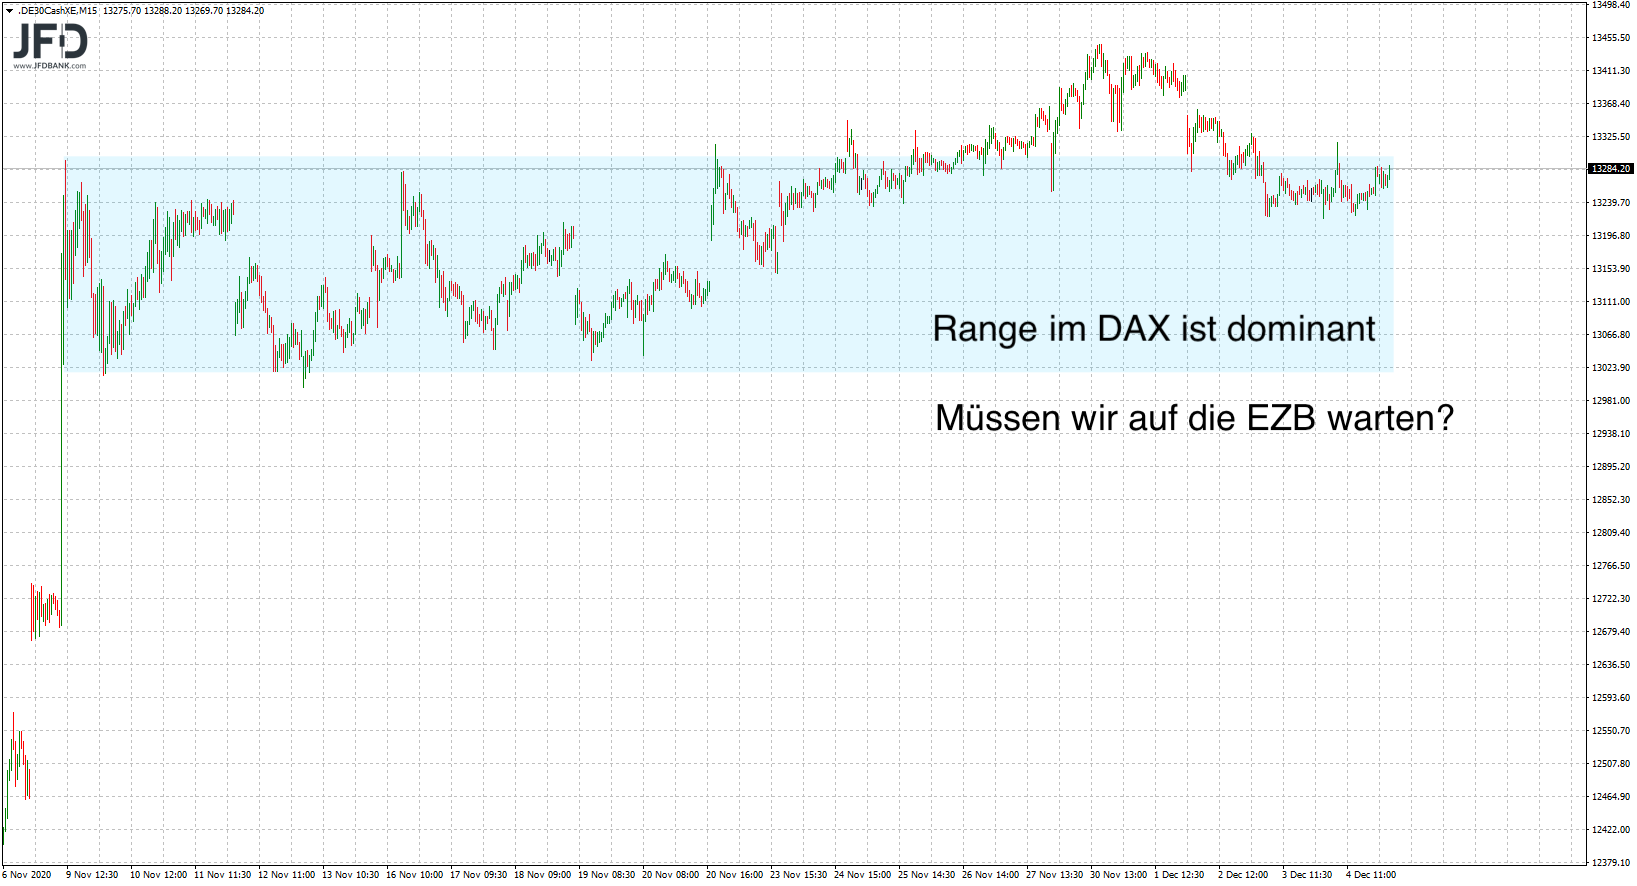 20201206_dax_teaser_kw50.png